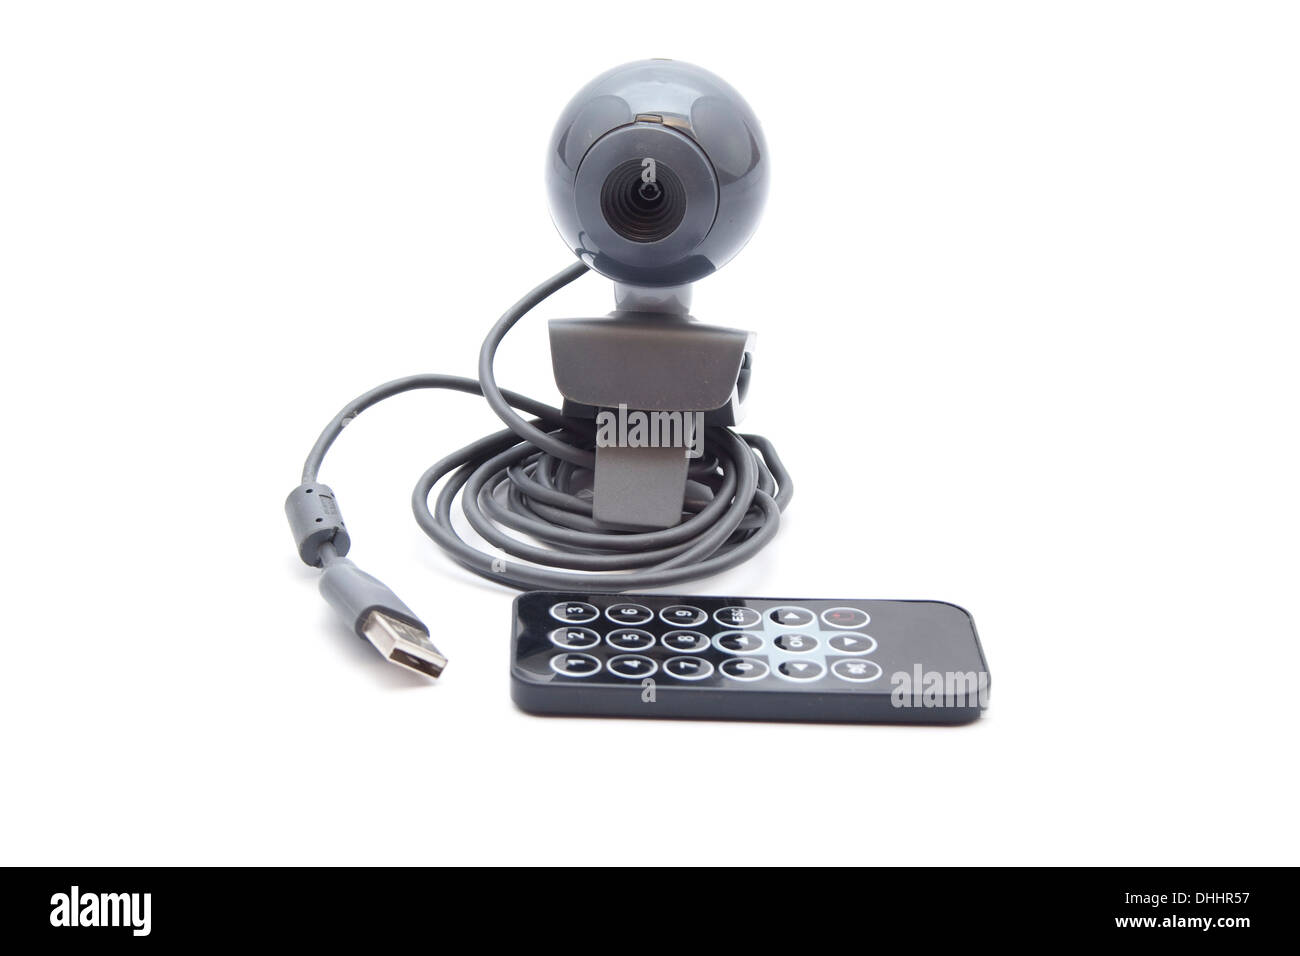 Webcam with Cable and Remote Control Stock Photo